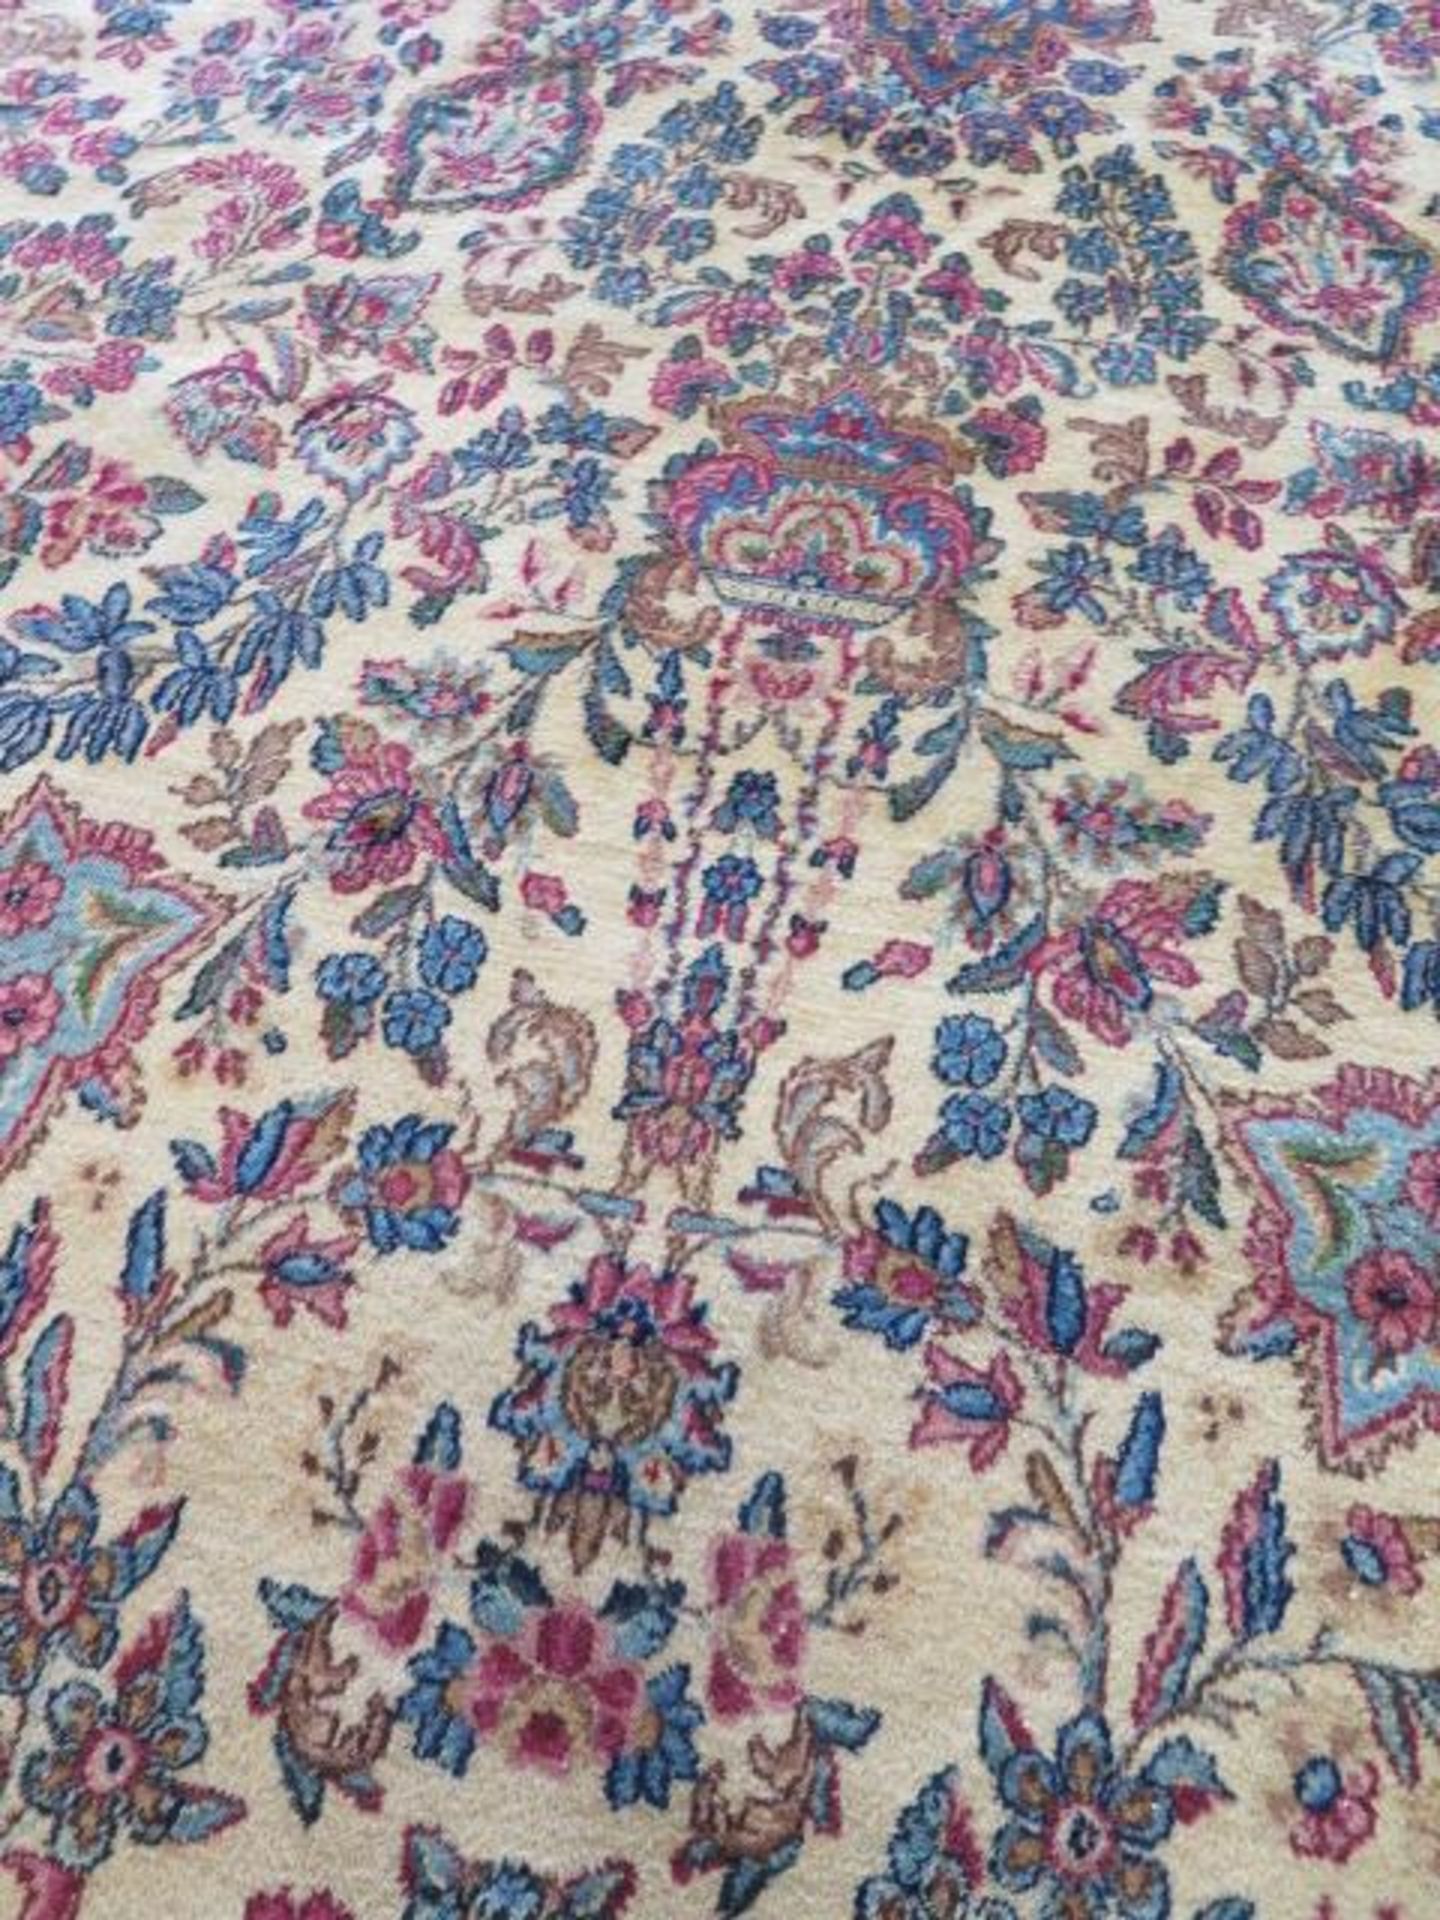 12.5' x 23' Persian Area Rug (High Quality) (SOLD AS-IS - NO WARRANTY) - Image 7 of 11